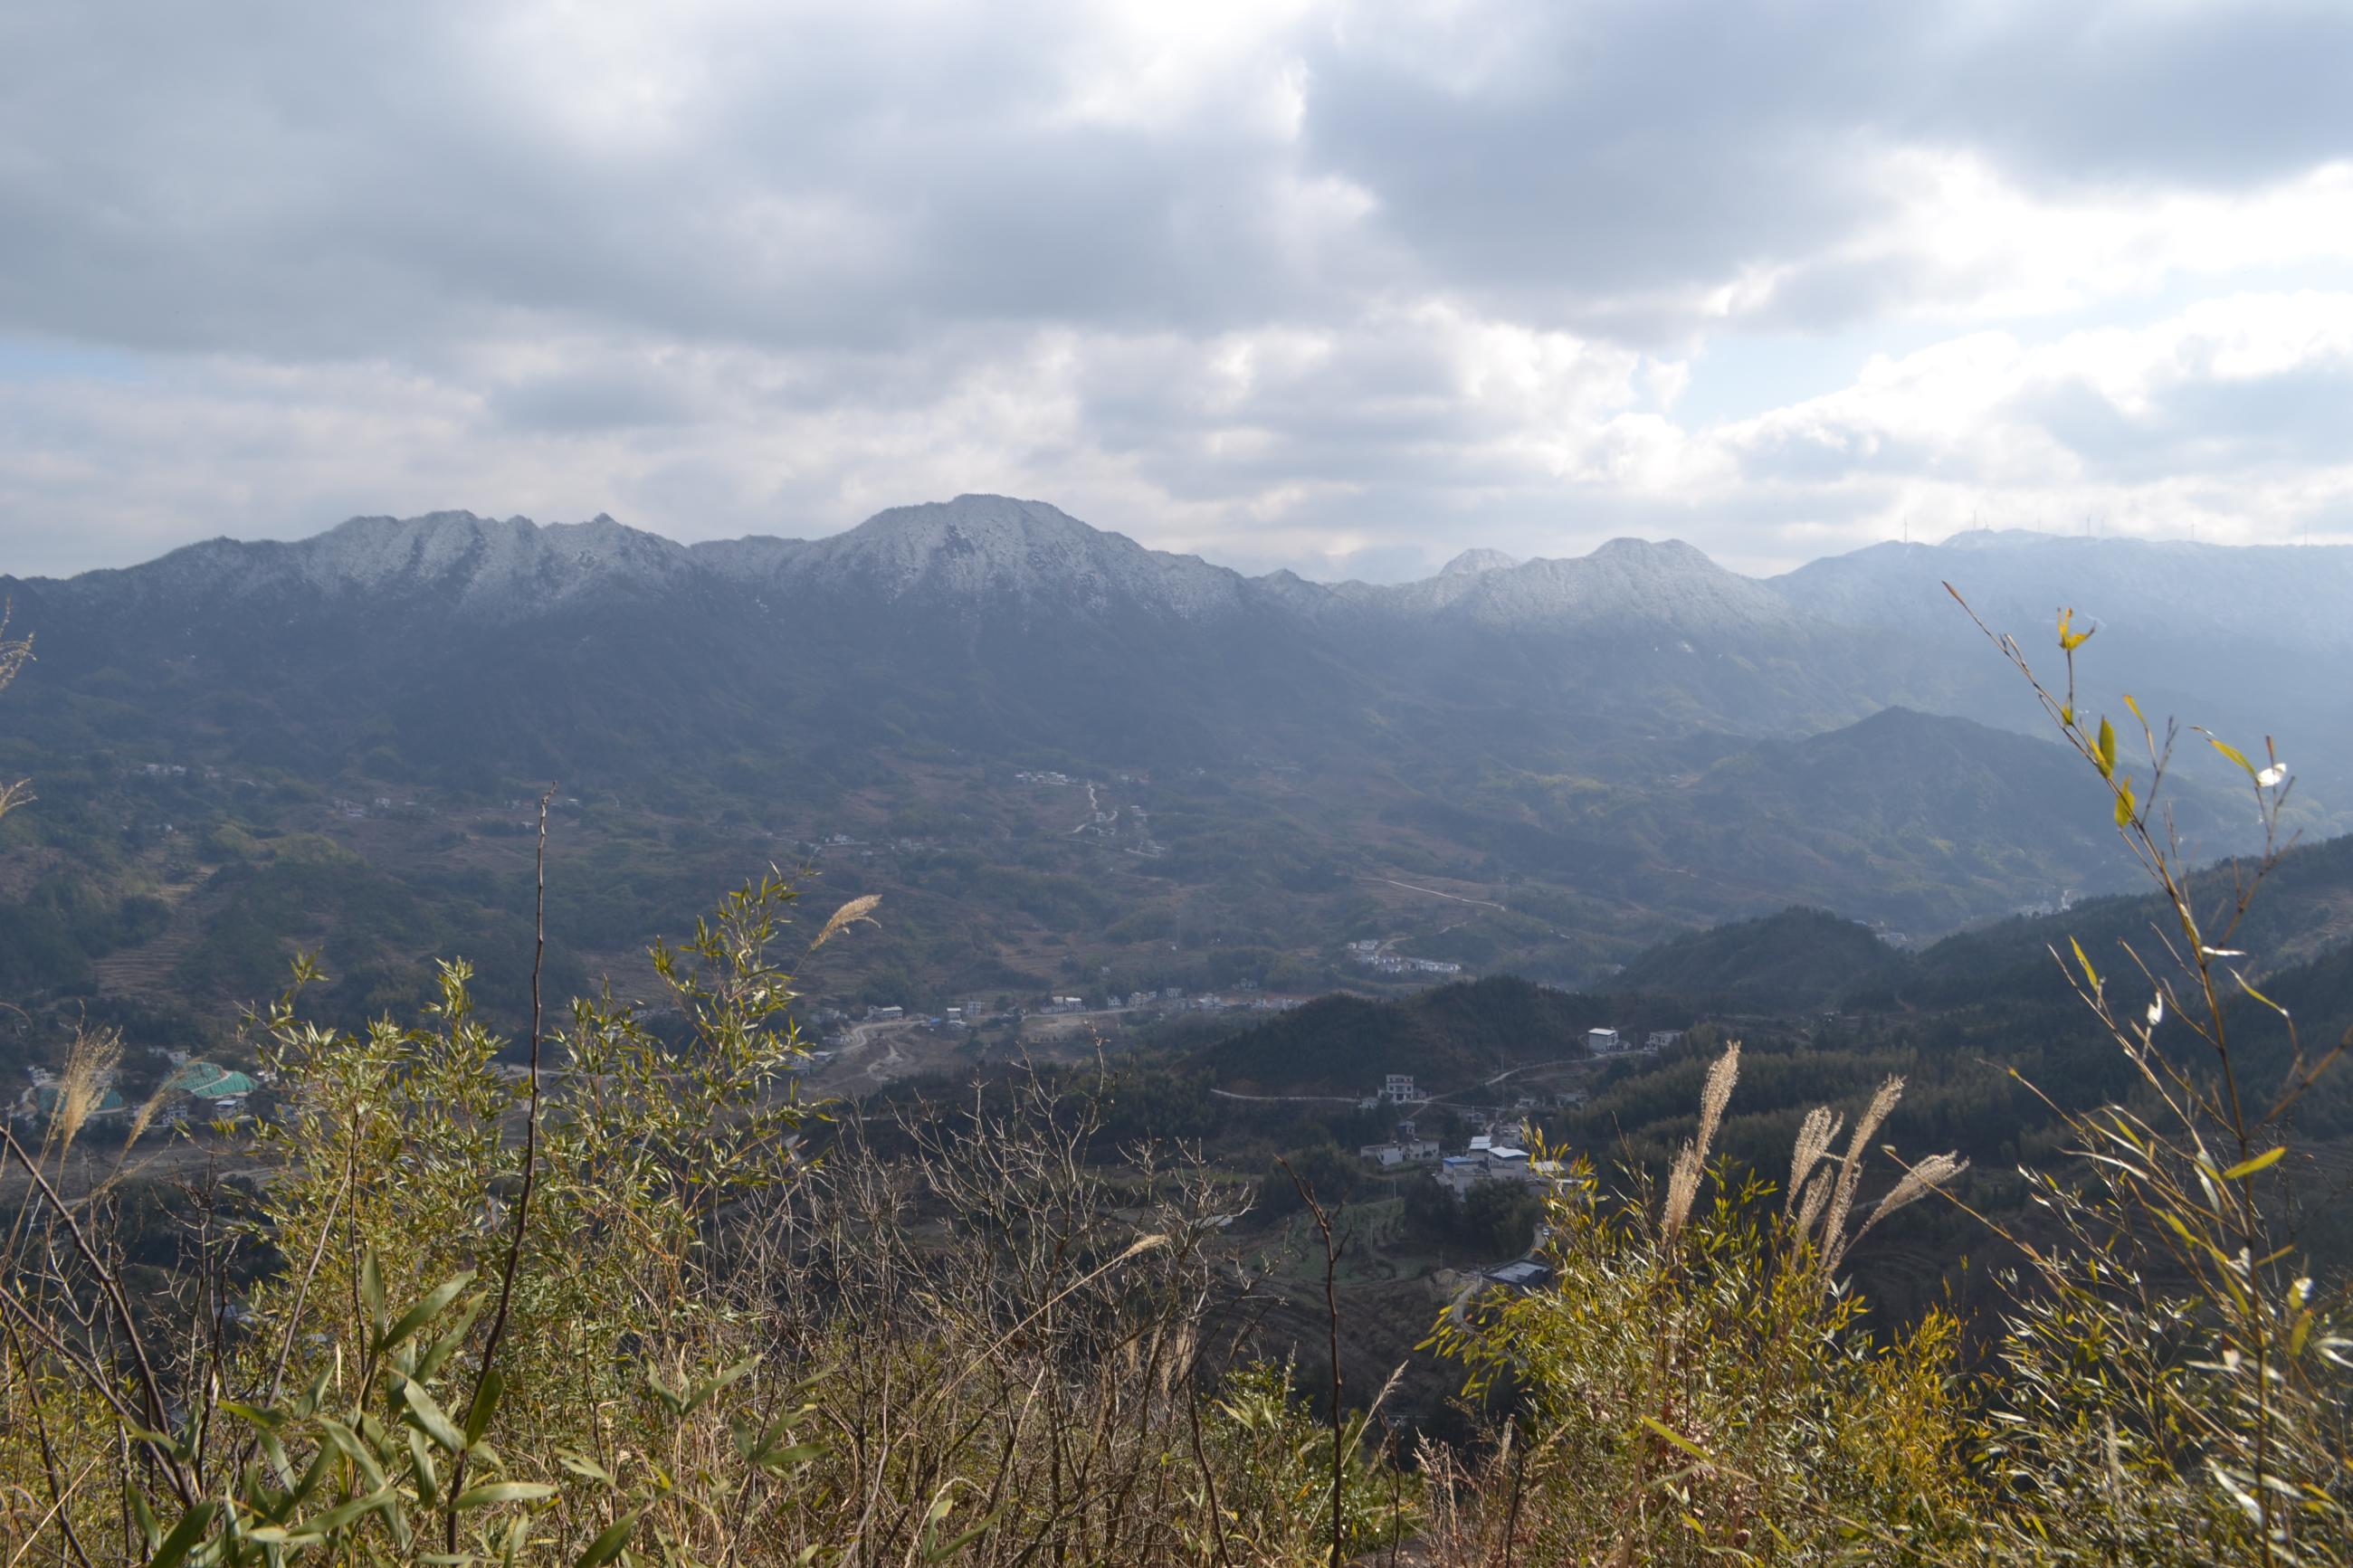 The view of Yunxi Village